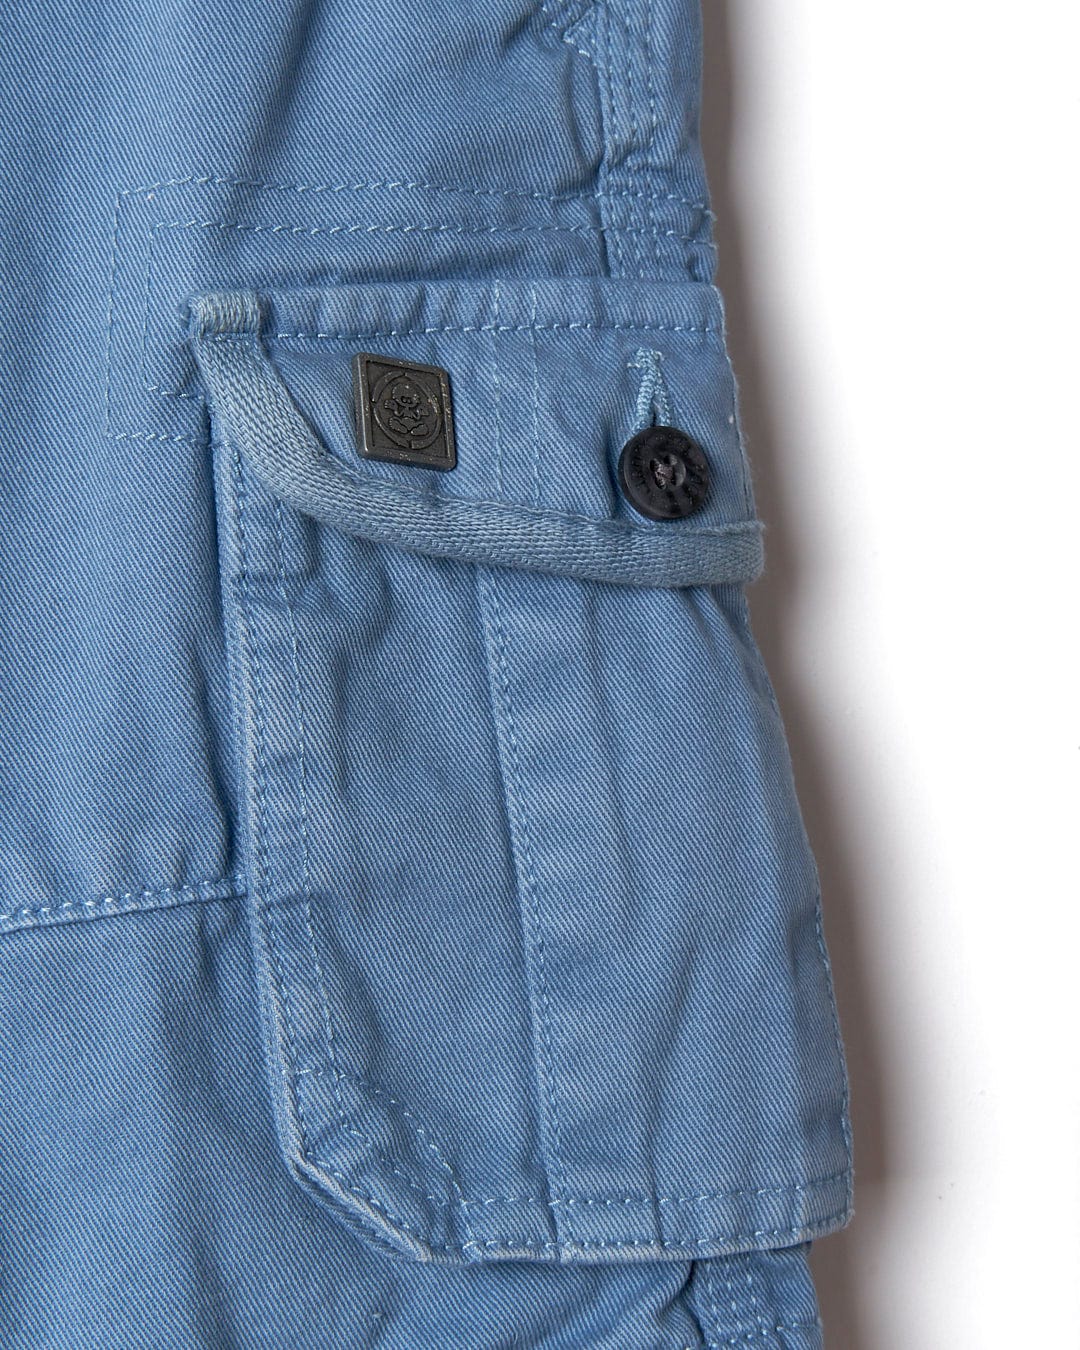 A pair of Saltrock Kaleb - Kids Cargo Shorts - Light Blue with buttons on the pockets.